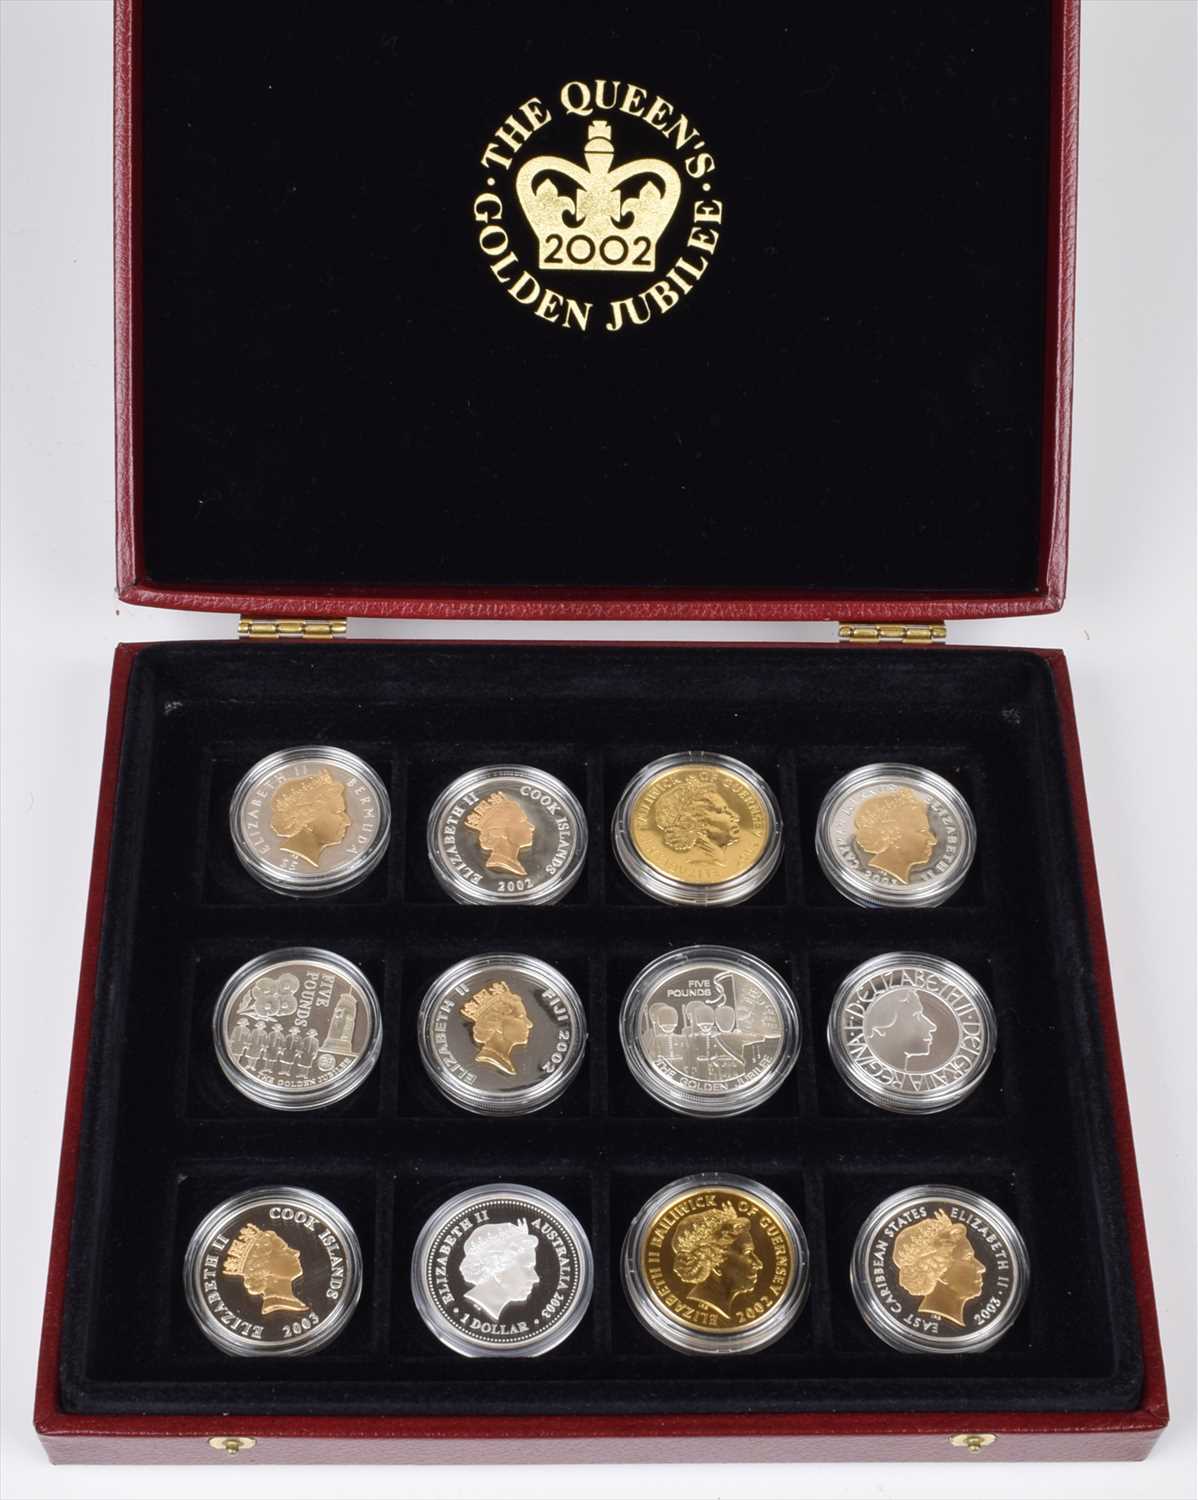 Lot 15 - Box containing Five Pounds and Dollar coins relating to the Queen's Golden Jubilee 2002.